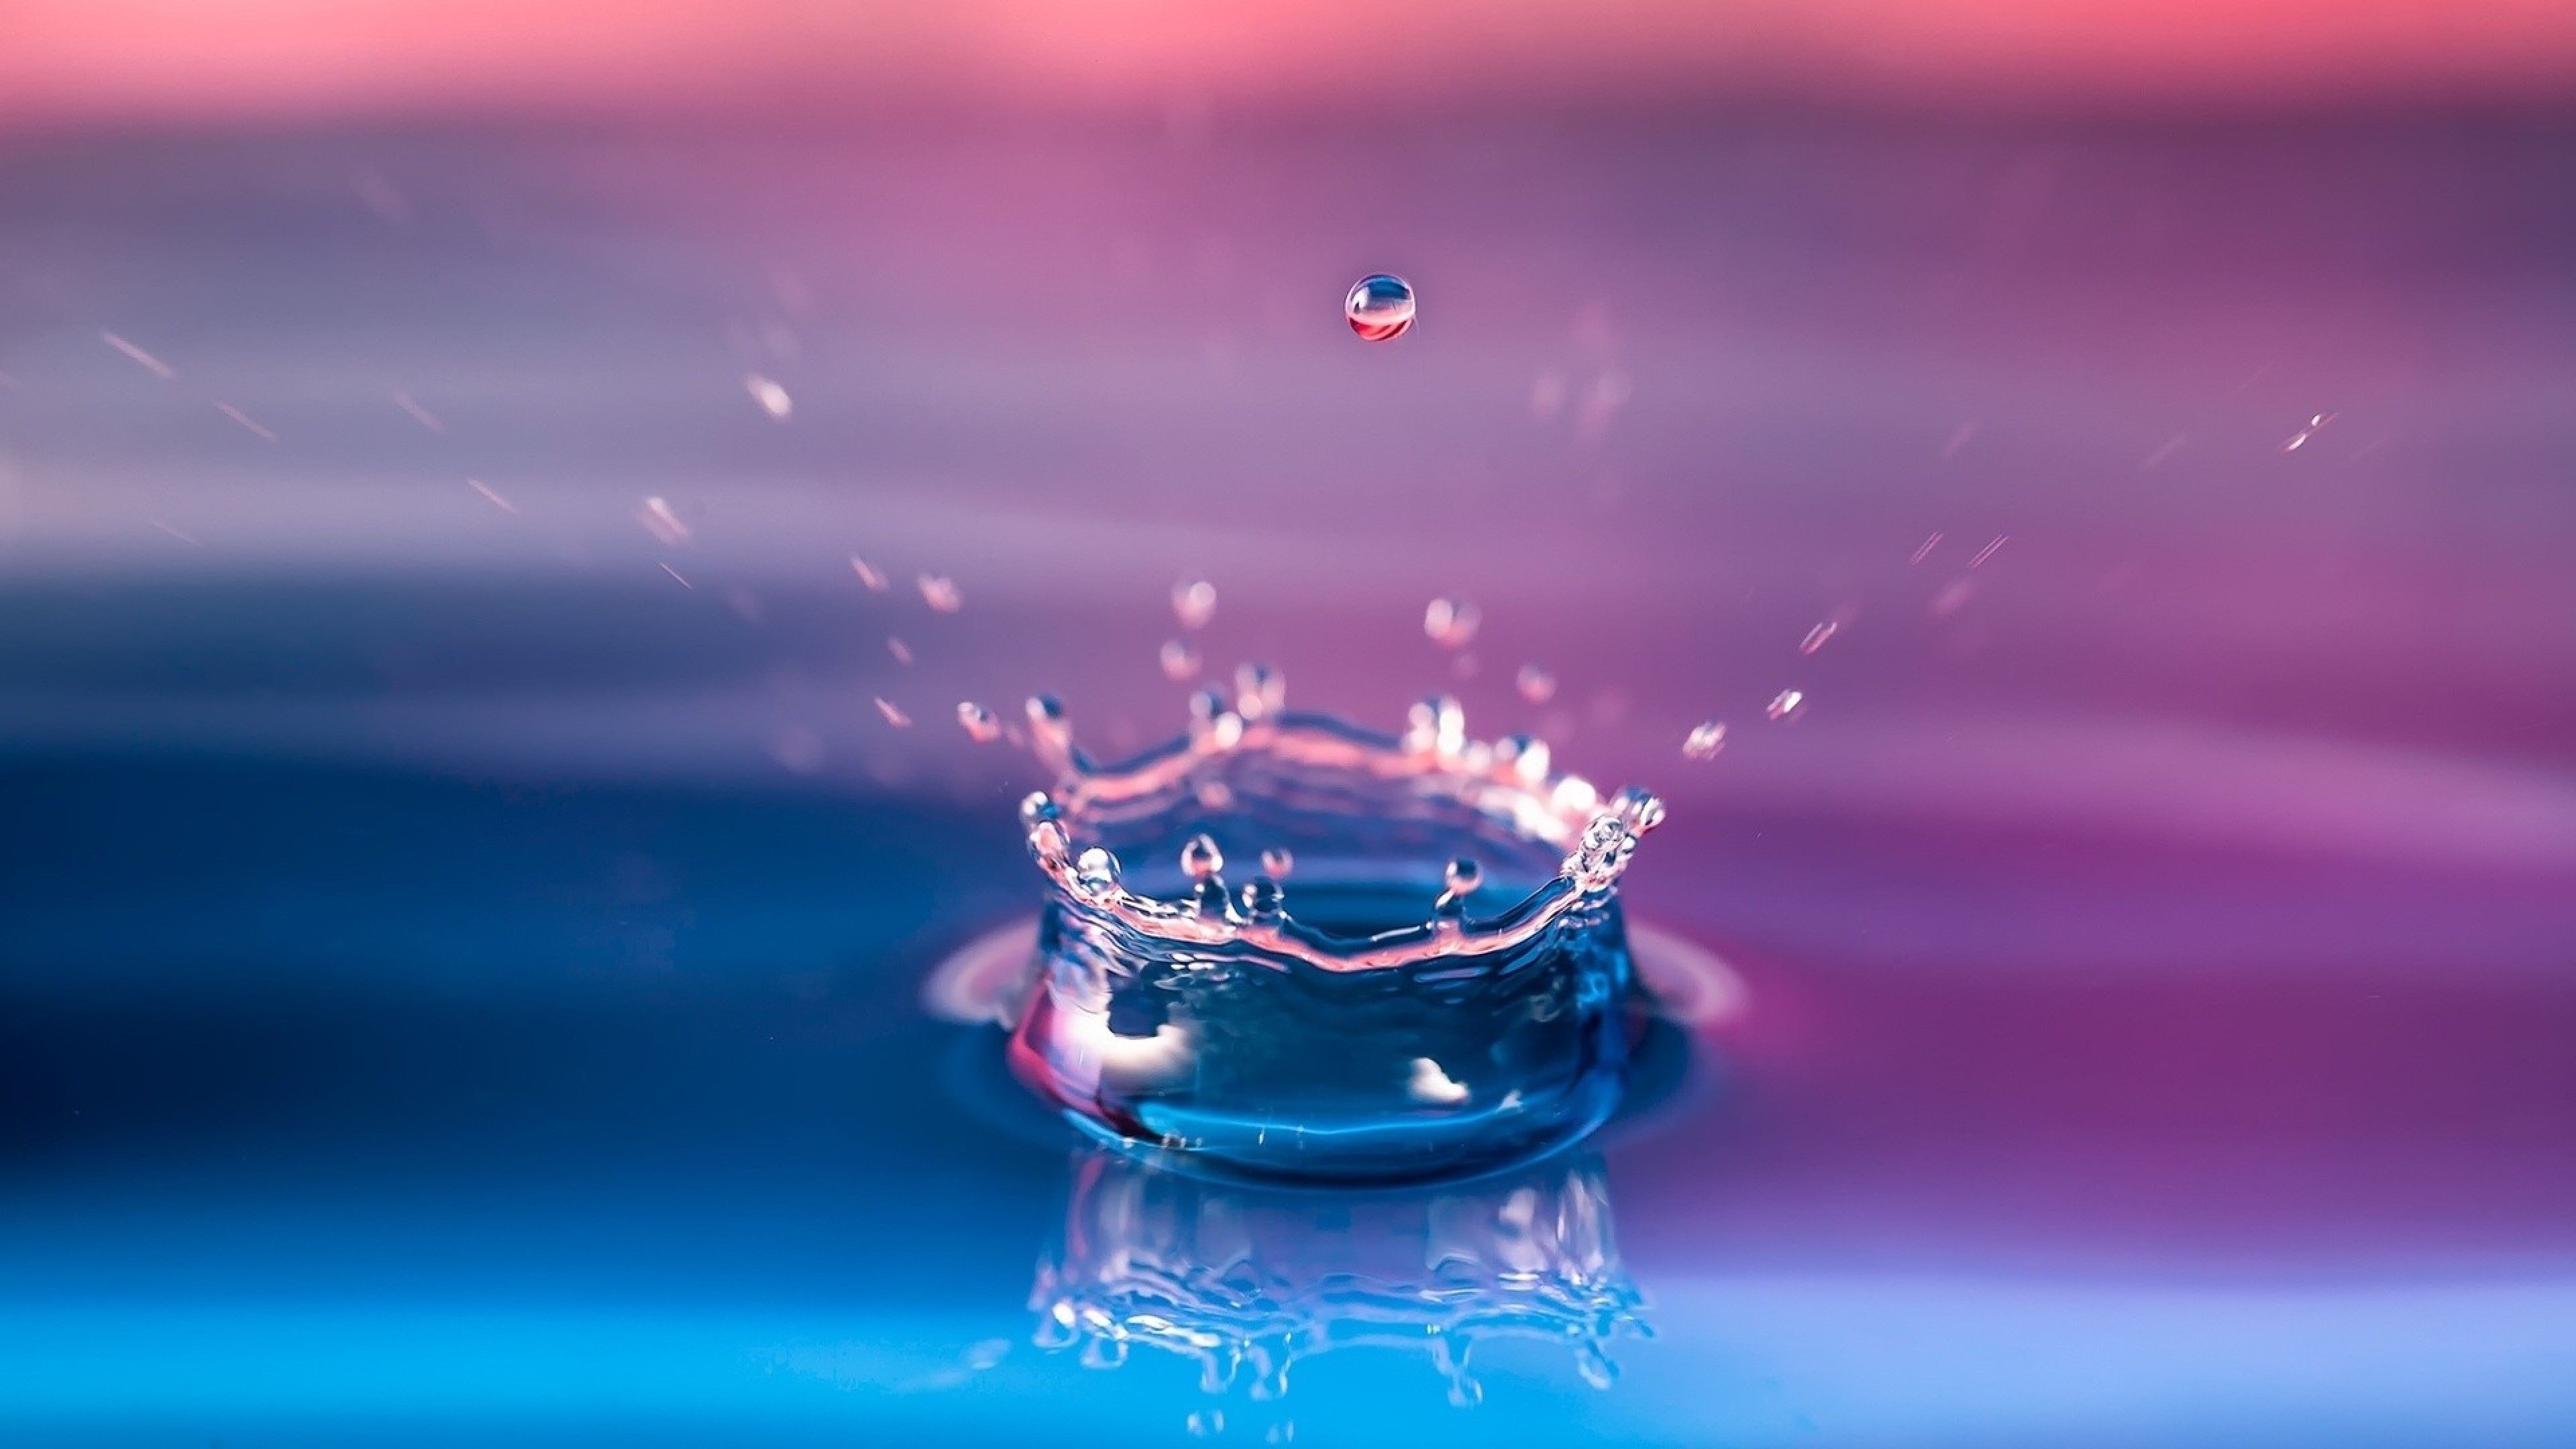 Water RainDrops Live Wallpaper - Apps on Google Play